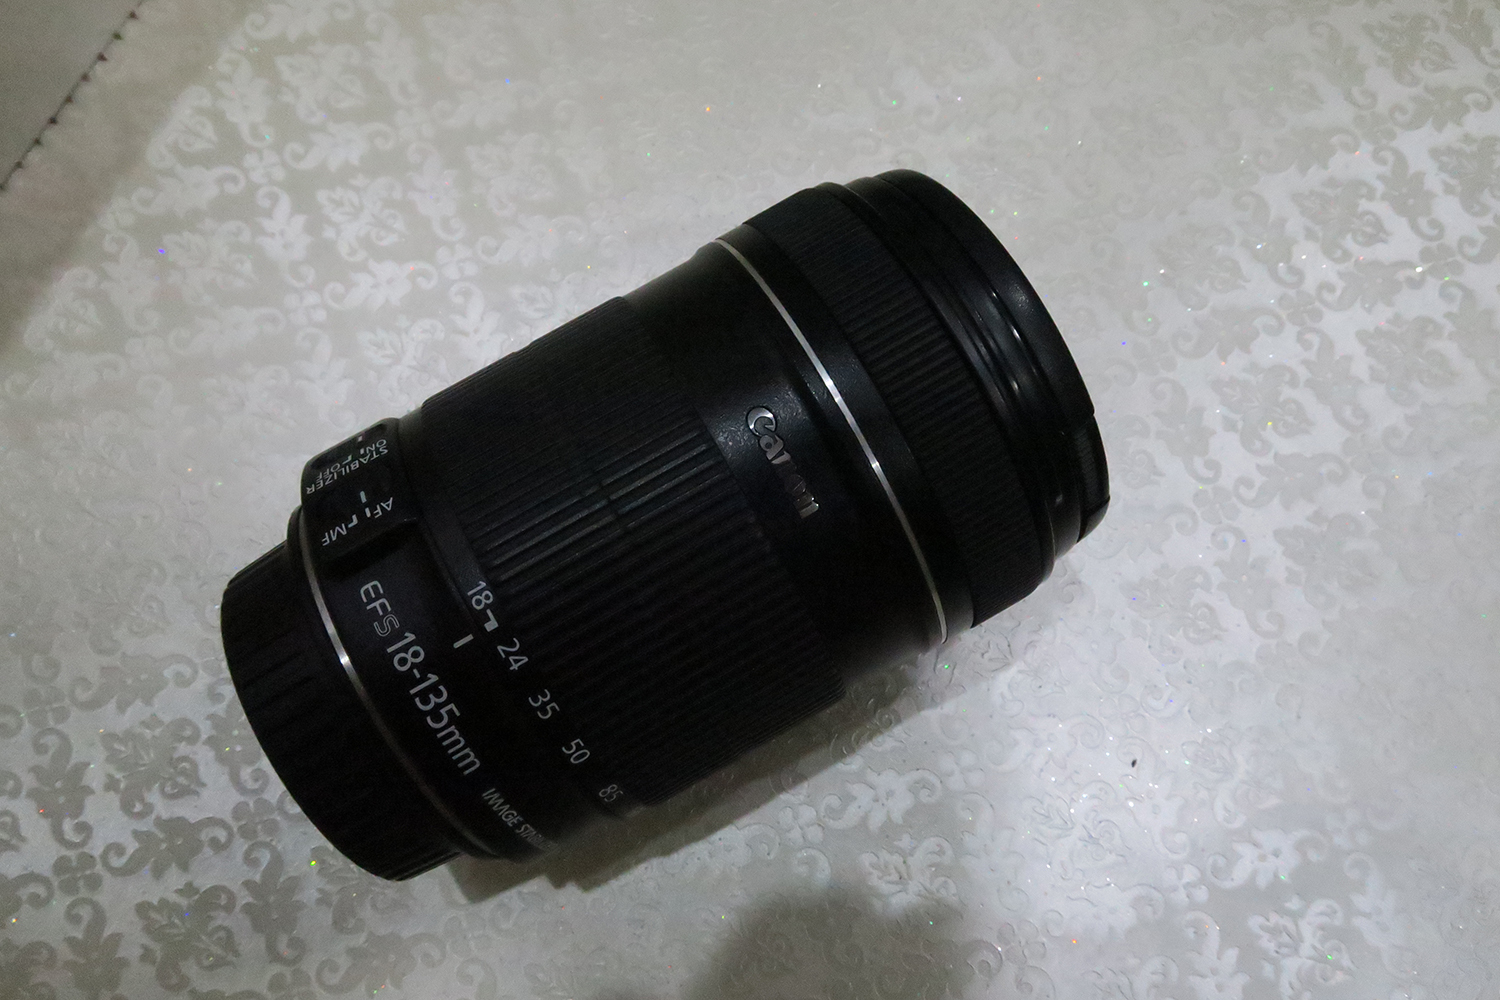  Canon EF-S 18-135mm f/3.5-5.6 IS